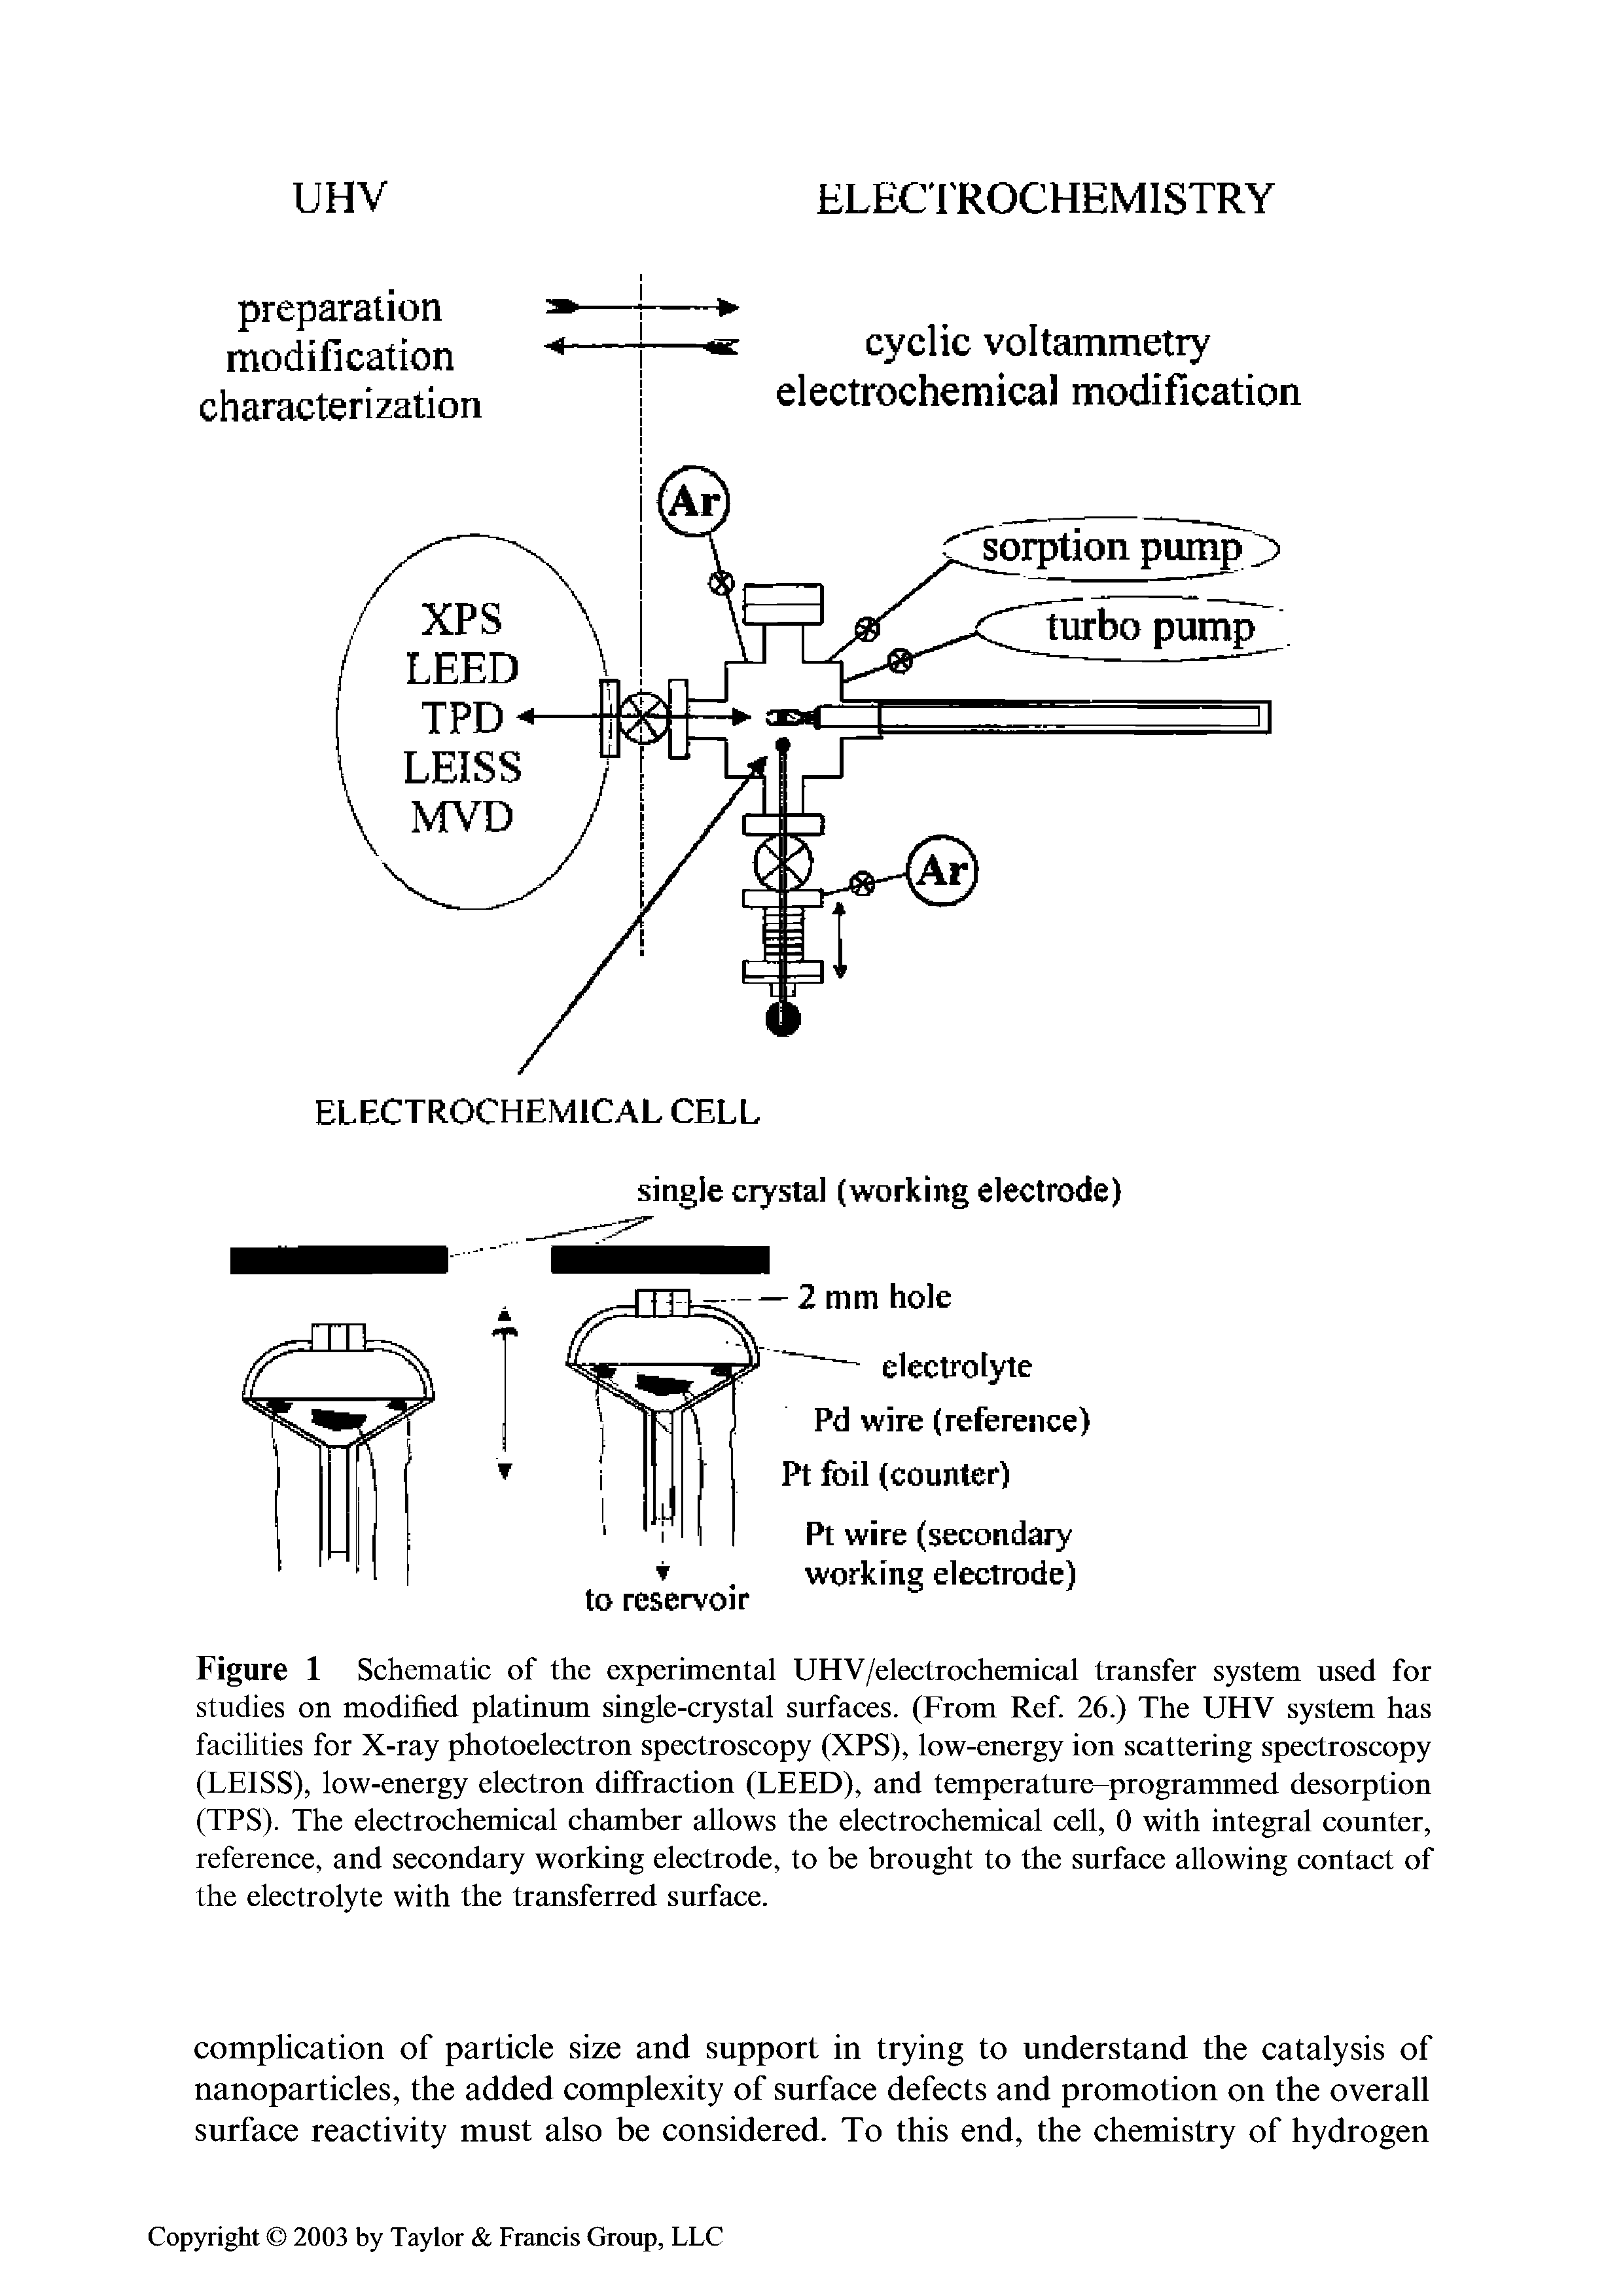 Figure 1 Schematic of the experimental UHV/electrochemical transfer system used for studies on modified platinum single-crystal surfaces. (From Ref. 26.) The UHV system has facilities for X-ray photoelectron spectroscopy (XPS), low-energy ion scattering spectroscopy (LEISS), low-energy electron diffraction (FEED), and temperature-programmed desorption (TPS). The electrochemical chamber allows the electrochemical cell, 0 with integral counter, reference, and secondary working electrode, to be brought to the surface allowing contact of the electrolyte with the transferred surface.